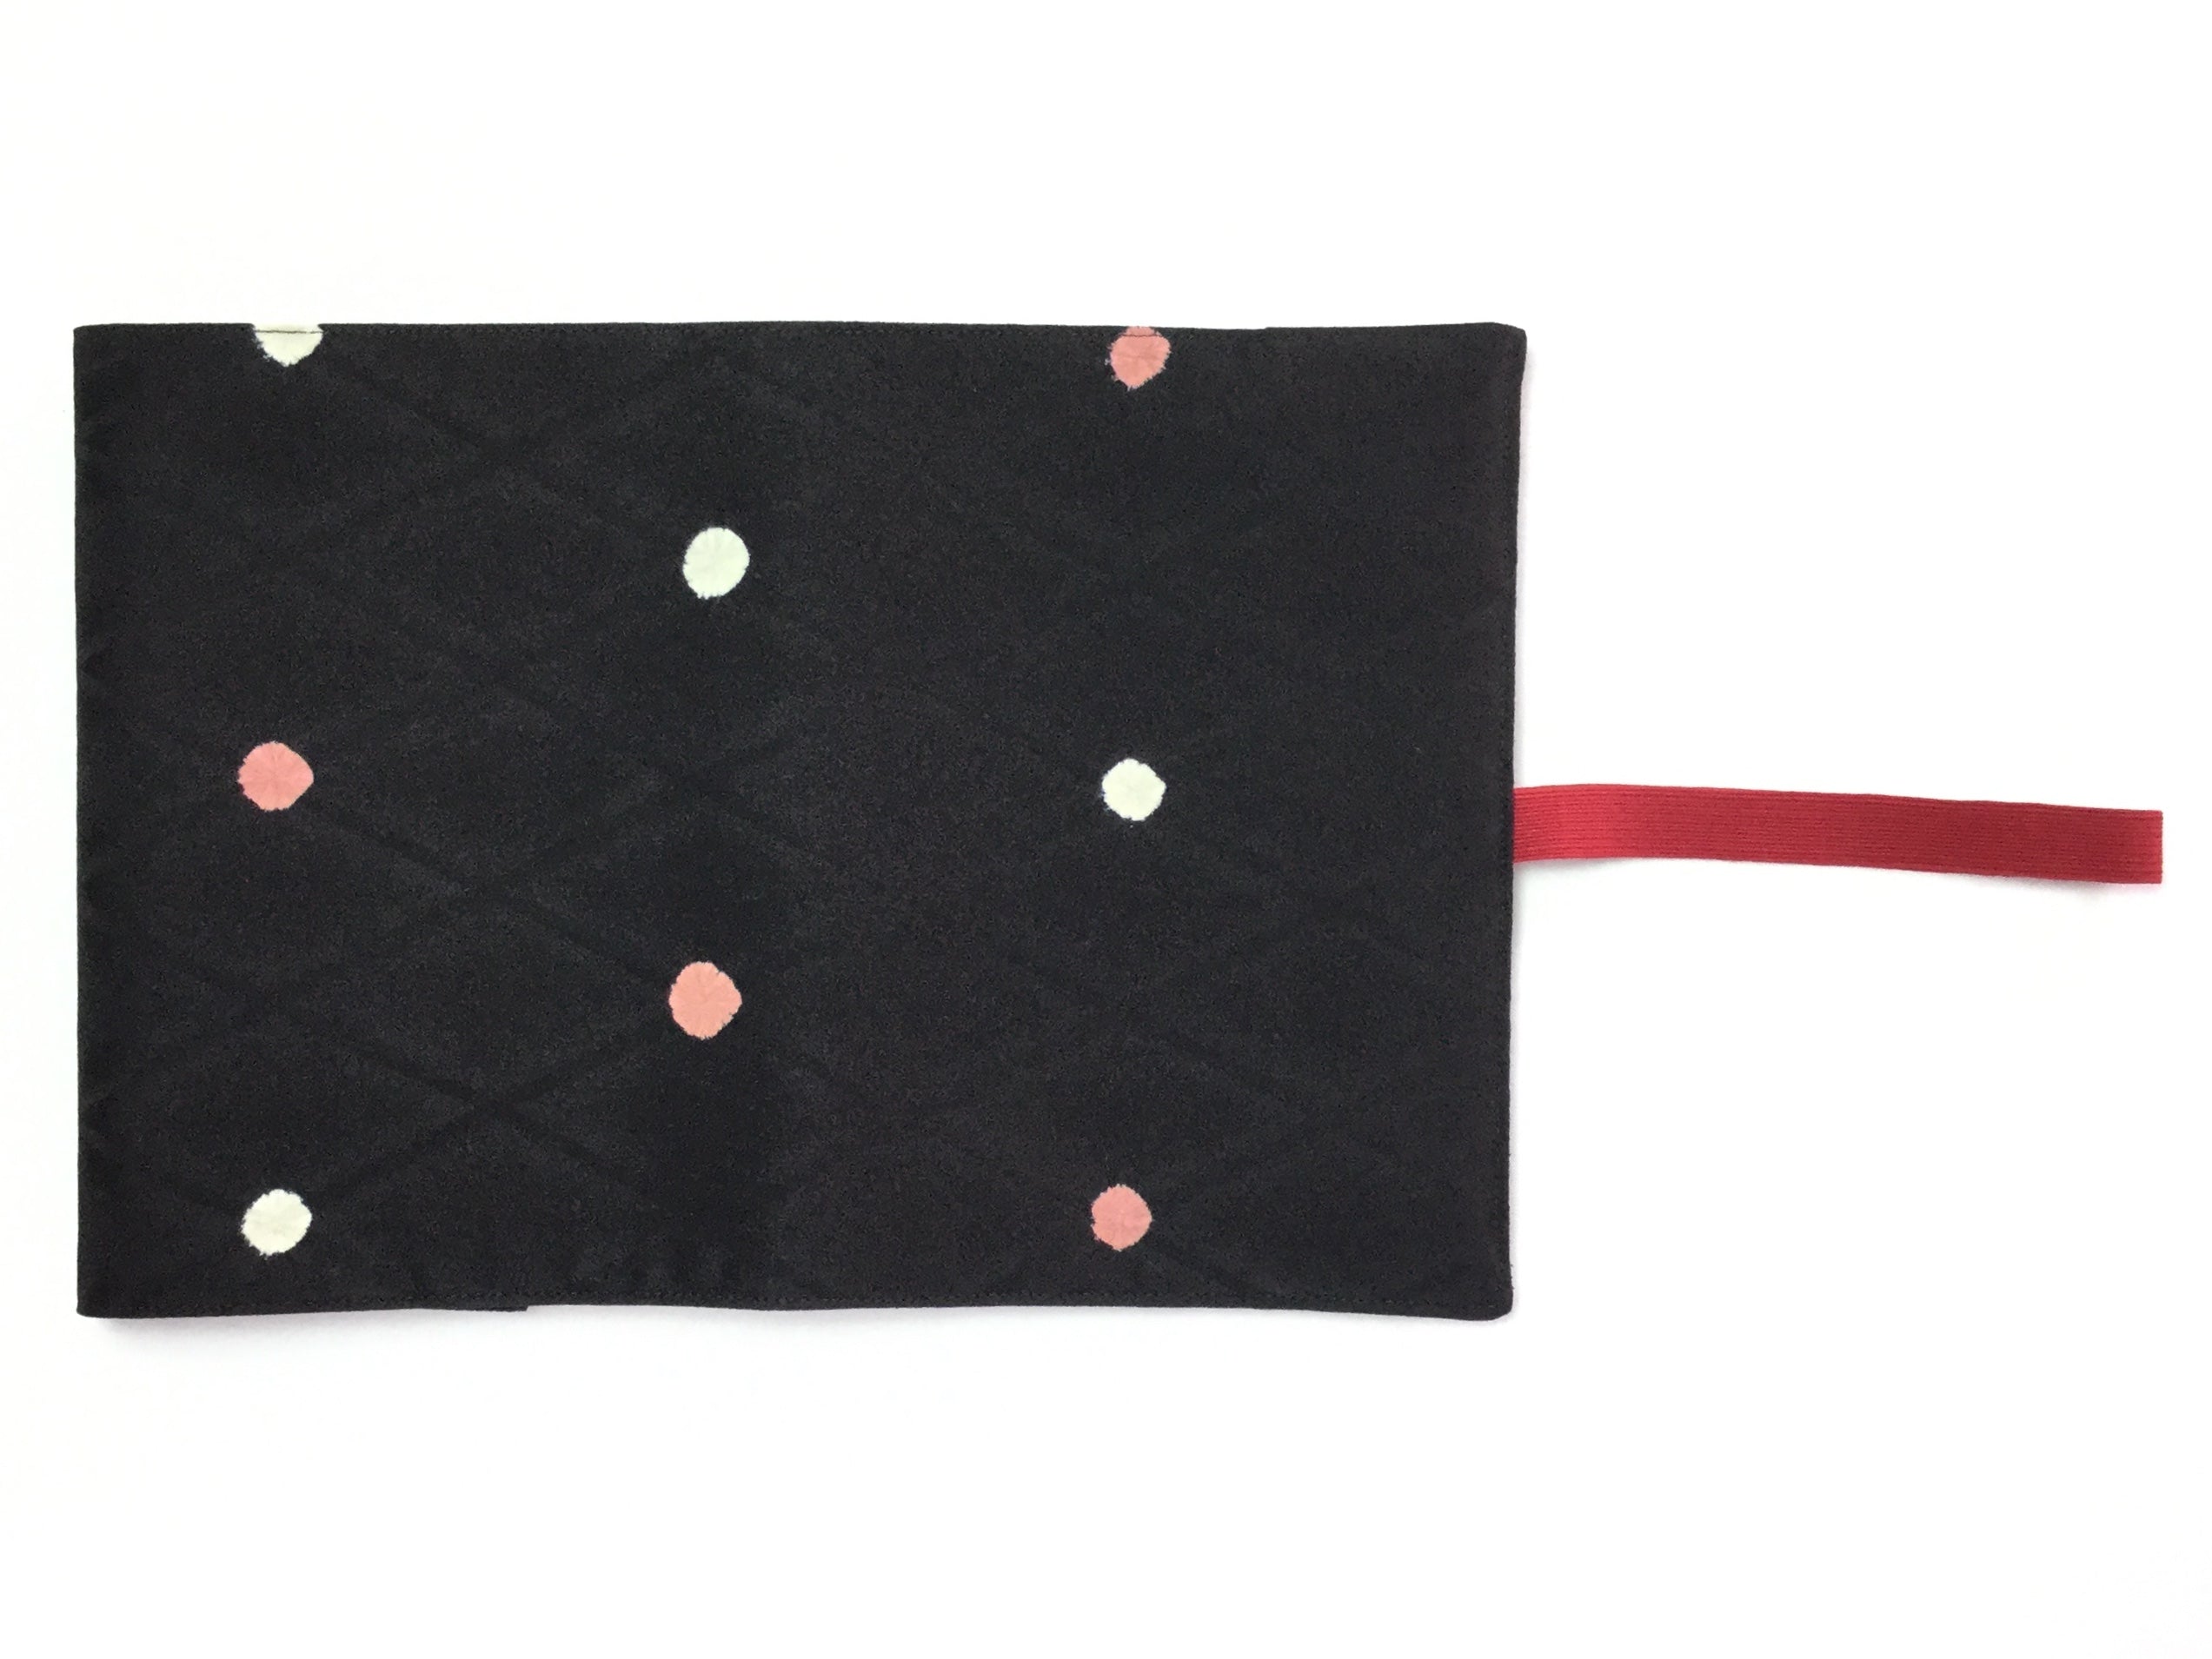 Kimono Journal Black Diamond With Dots With Red Band 着物ノート 白とピンク水玉 赤ゴ Megumi Project